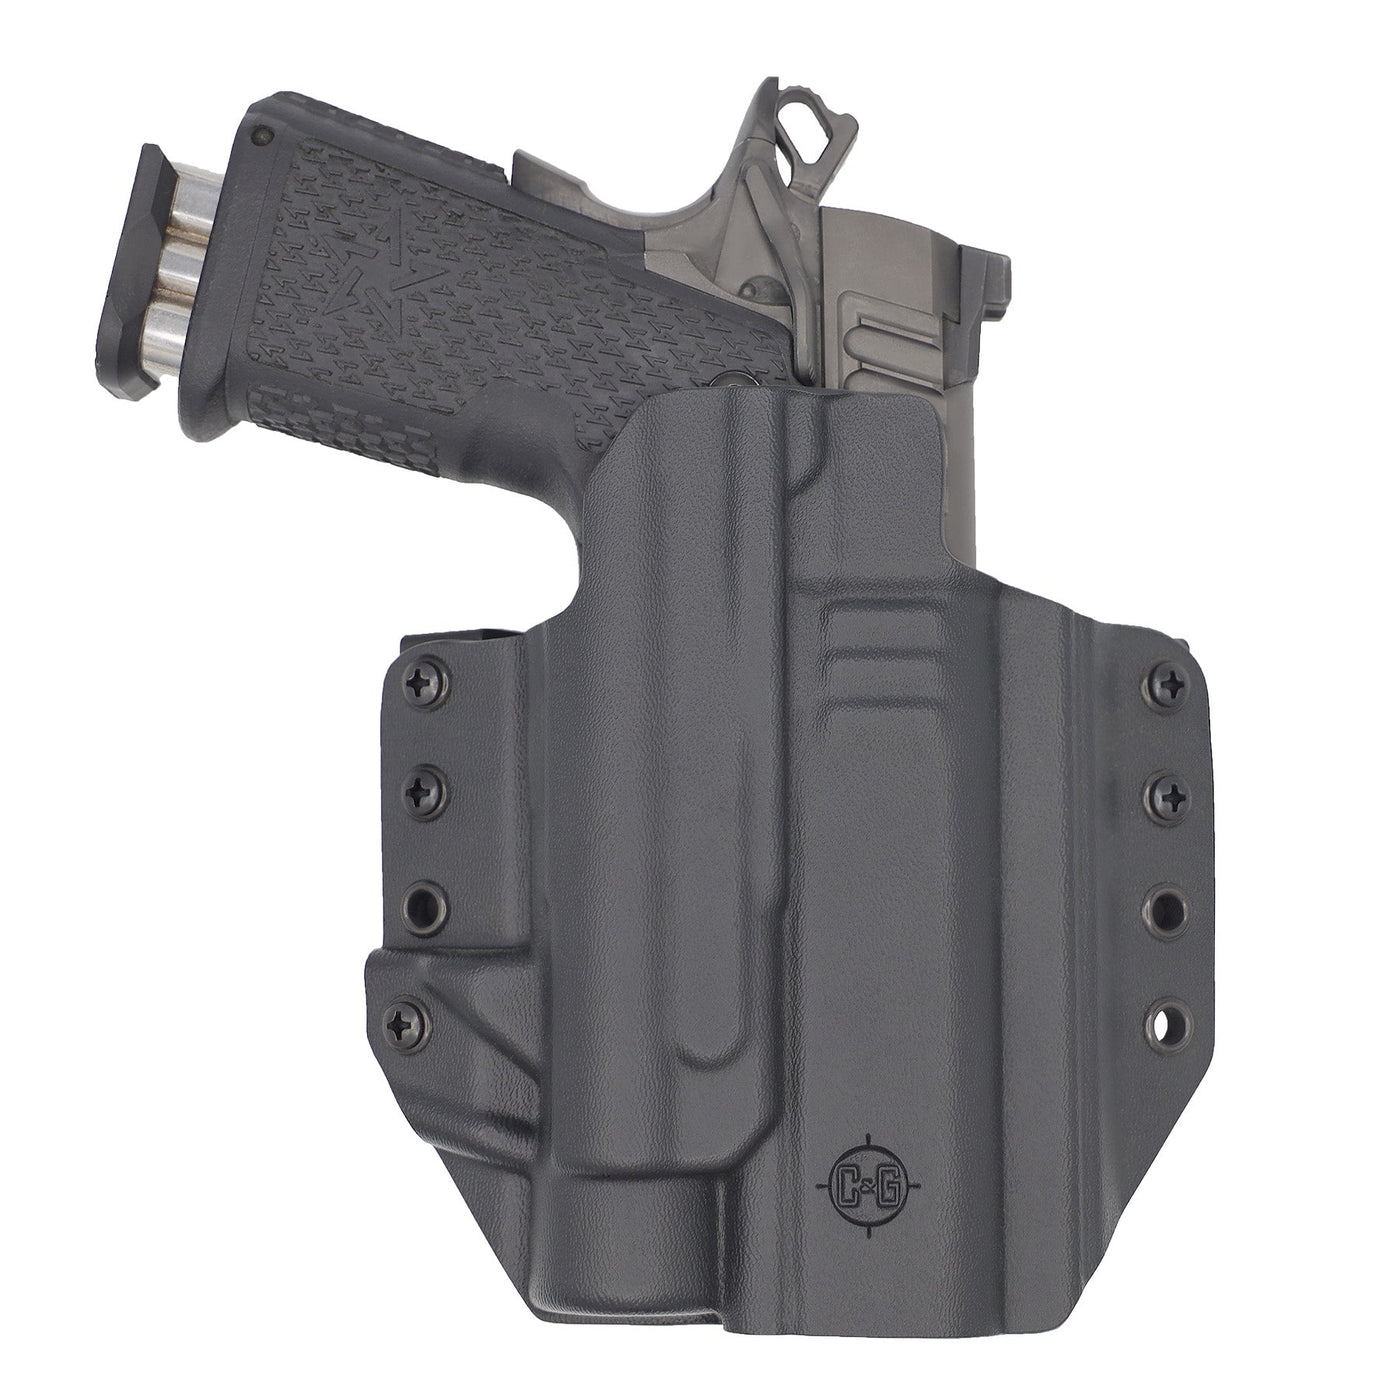 C&G Holsters Quickship OWB Tactical 1911 DS Prodigy Streamlight TLR1 in holstered position